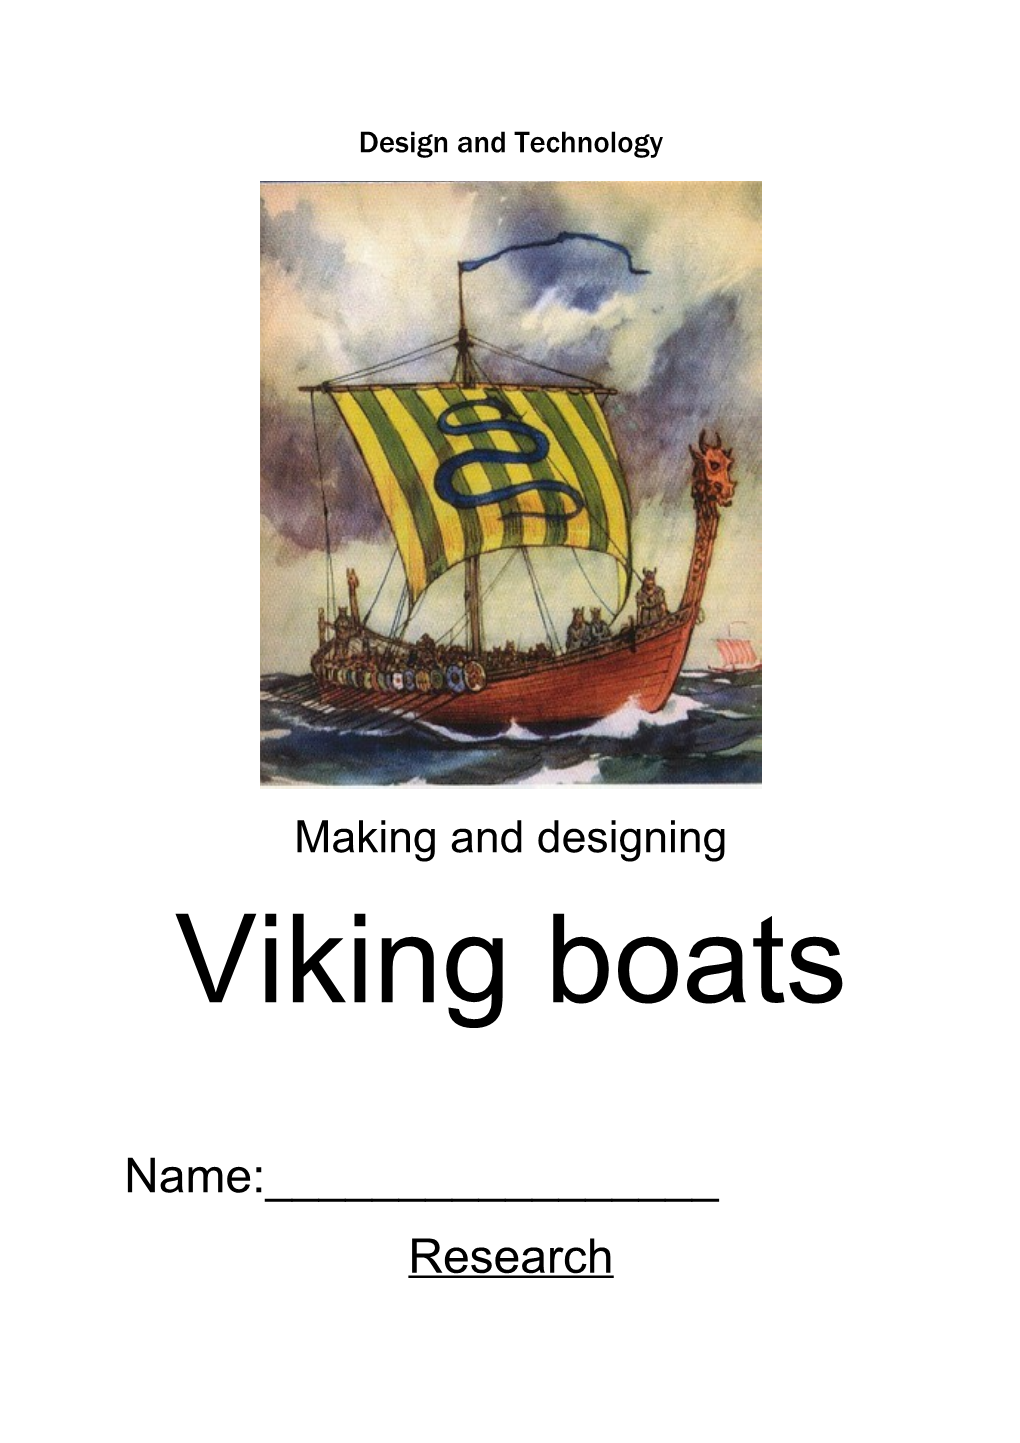 Skill: I Can Collect Information About Viking Boats